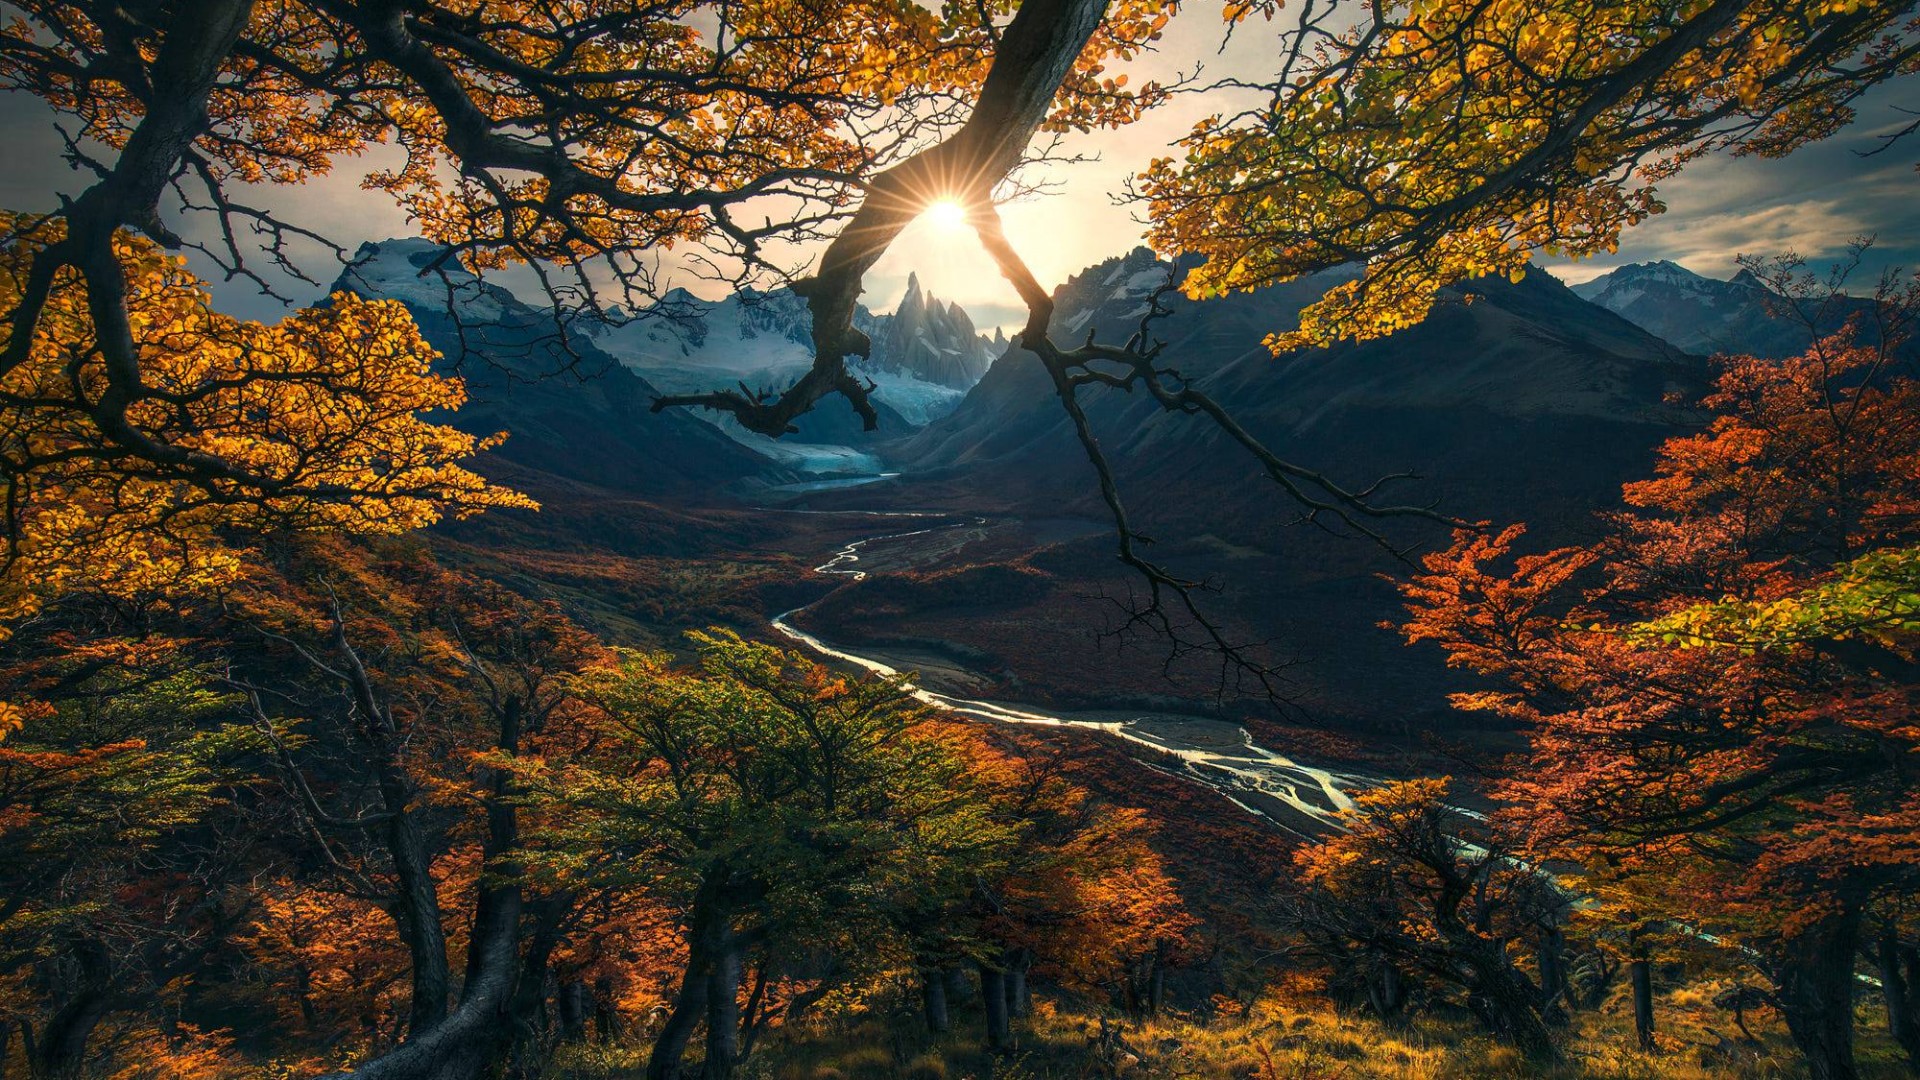 Wallpaper forest tree mountains autumn hd nature